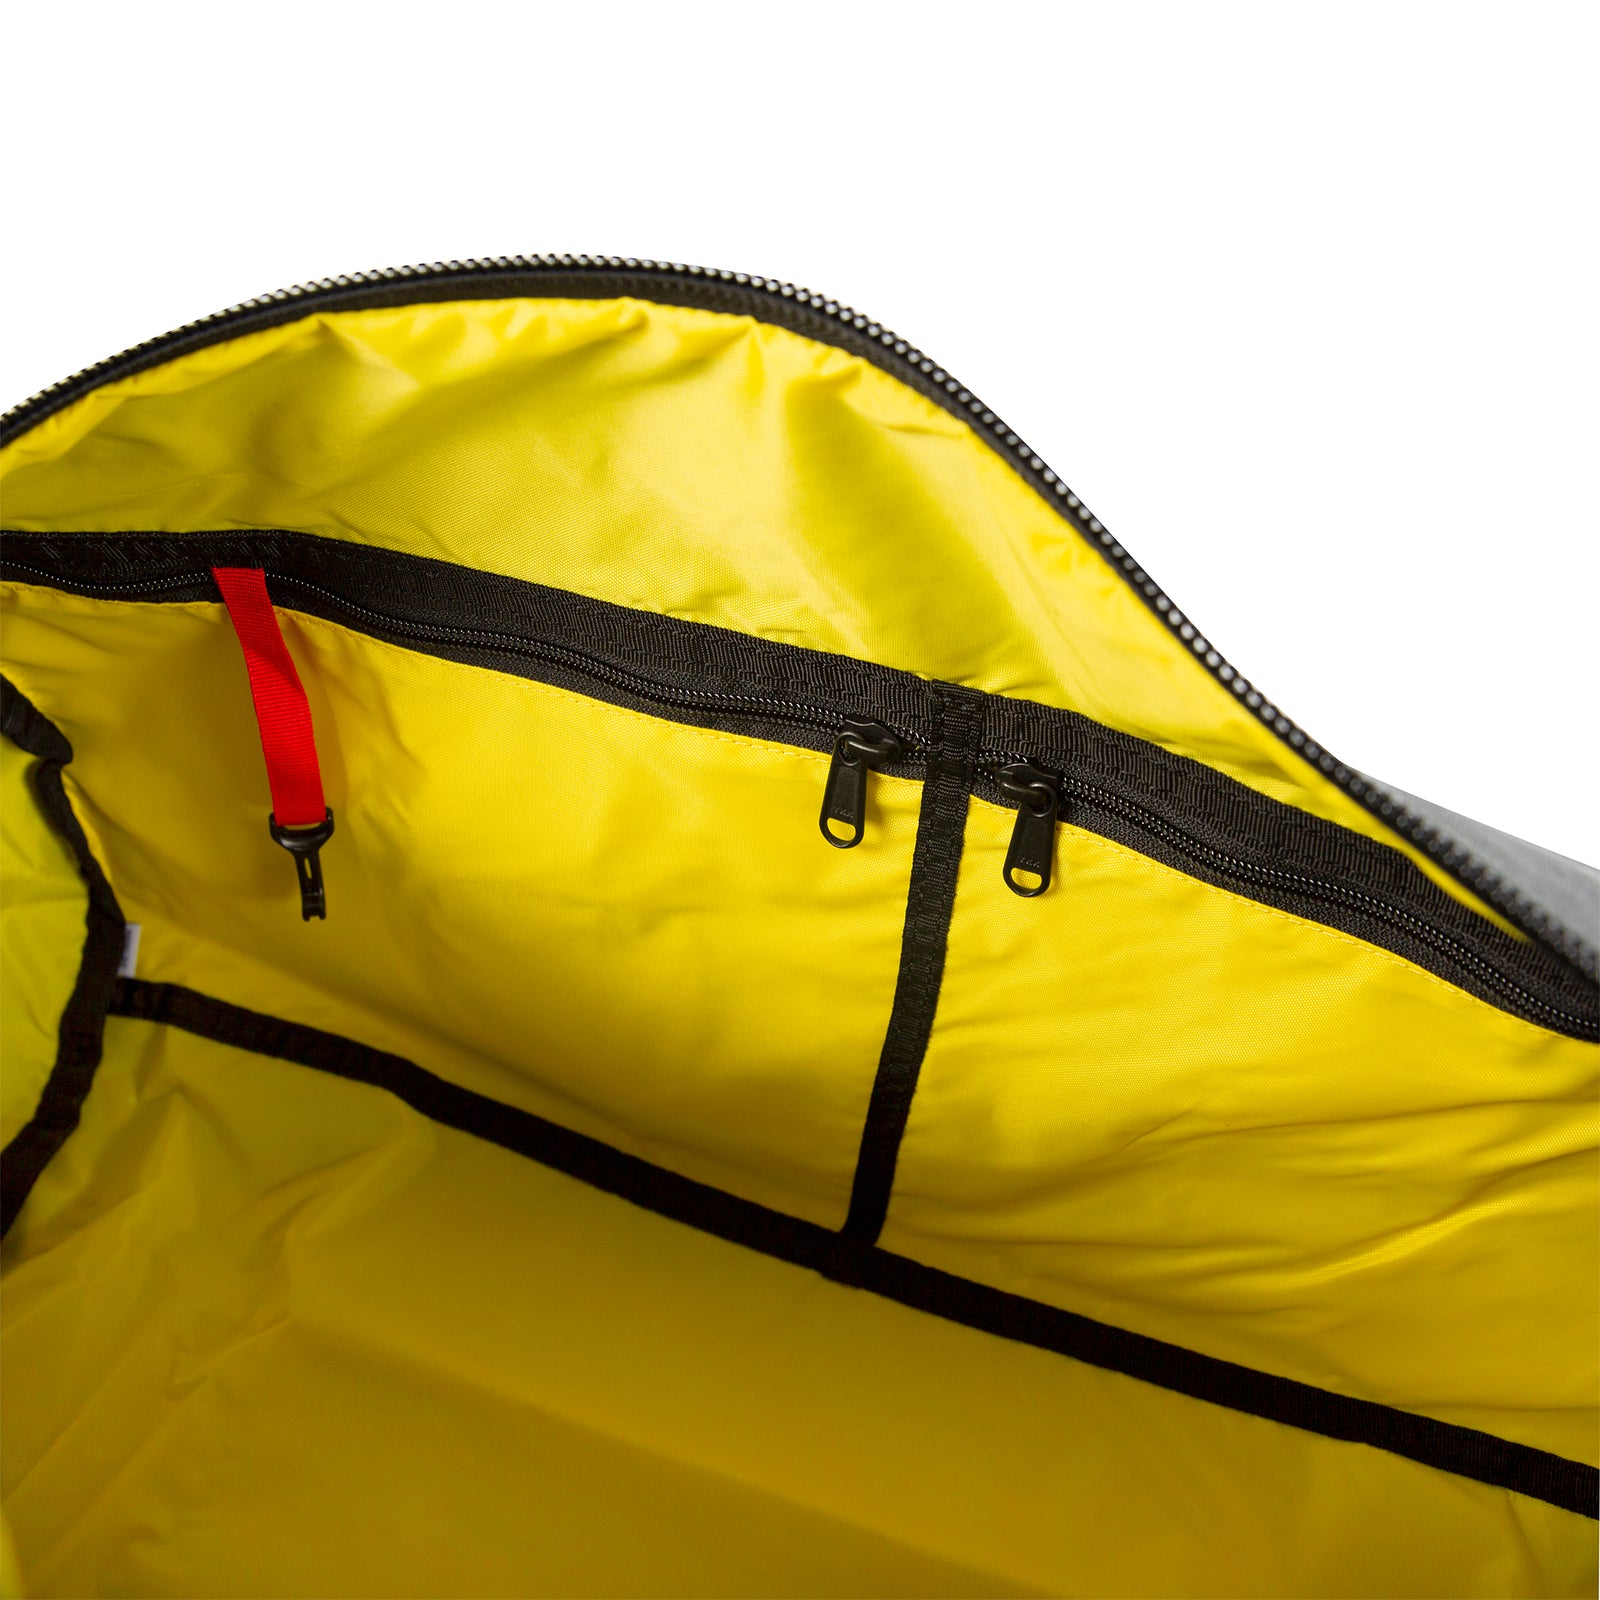 General shot of interior of Topo Designs Classic Duffel 20" retro gym bag showing yellow lining, zipper pockets, and red key clip.